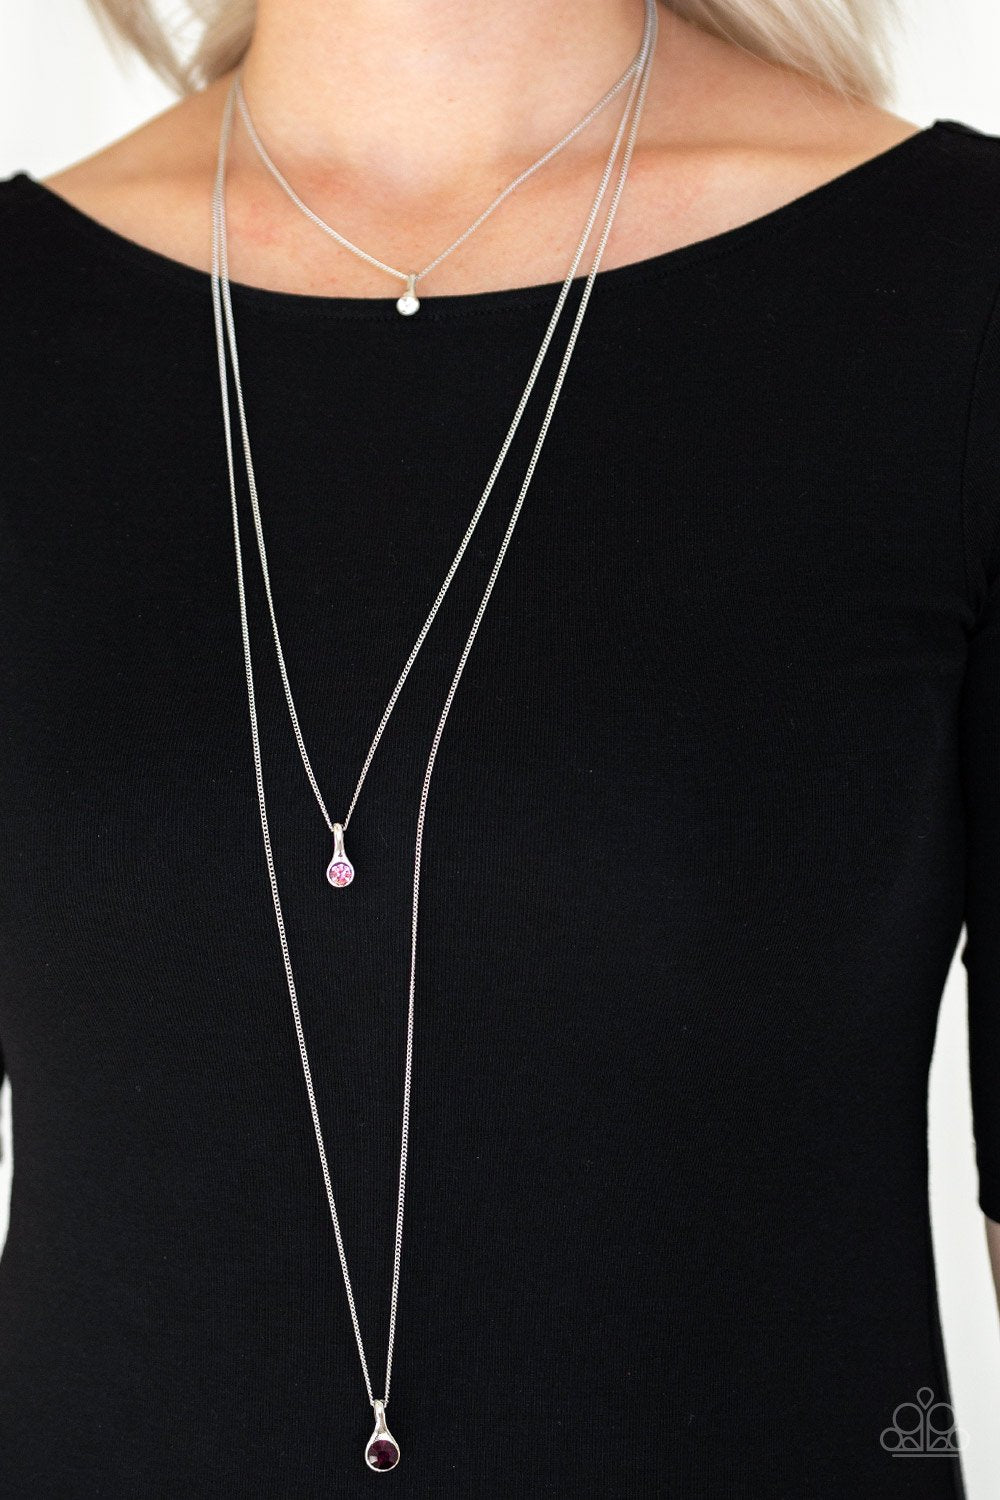 Crystal Chic-purple-Paparazzi necklace